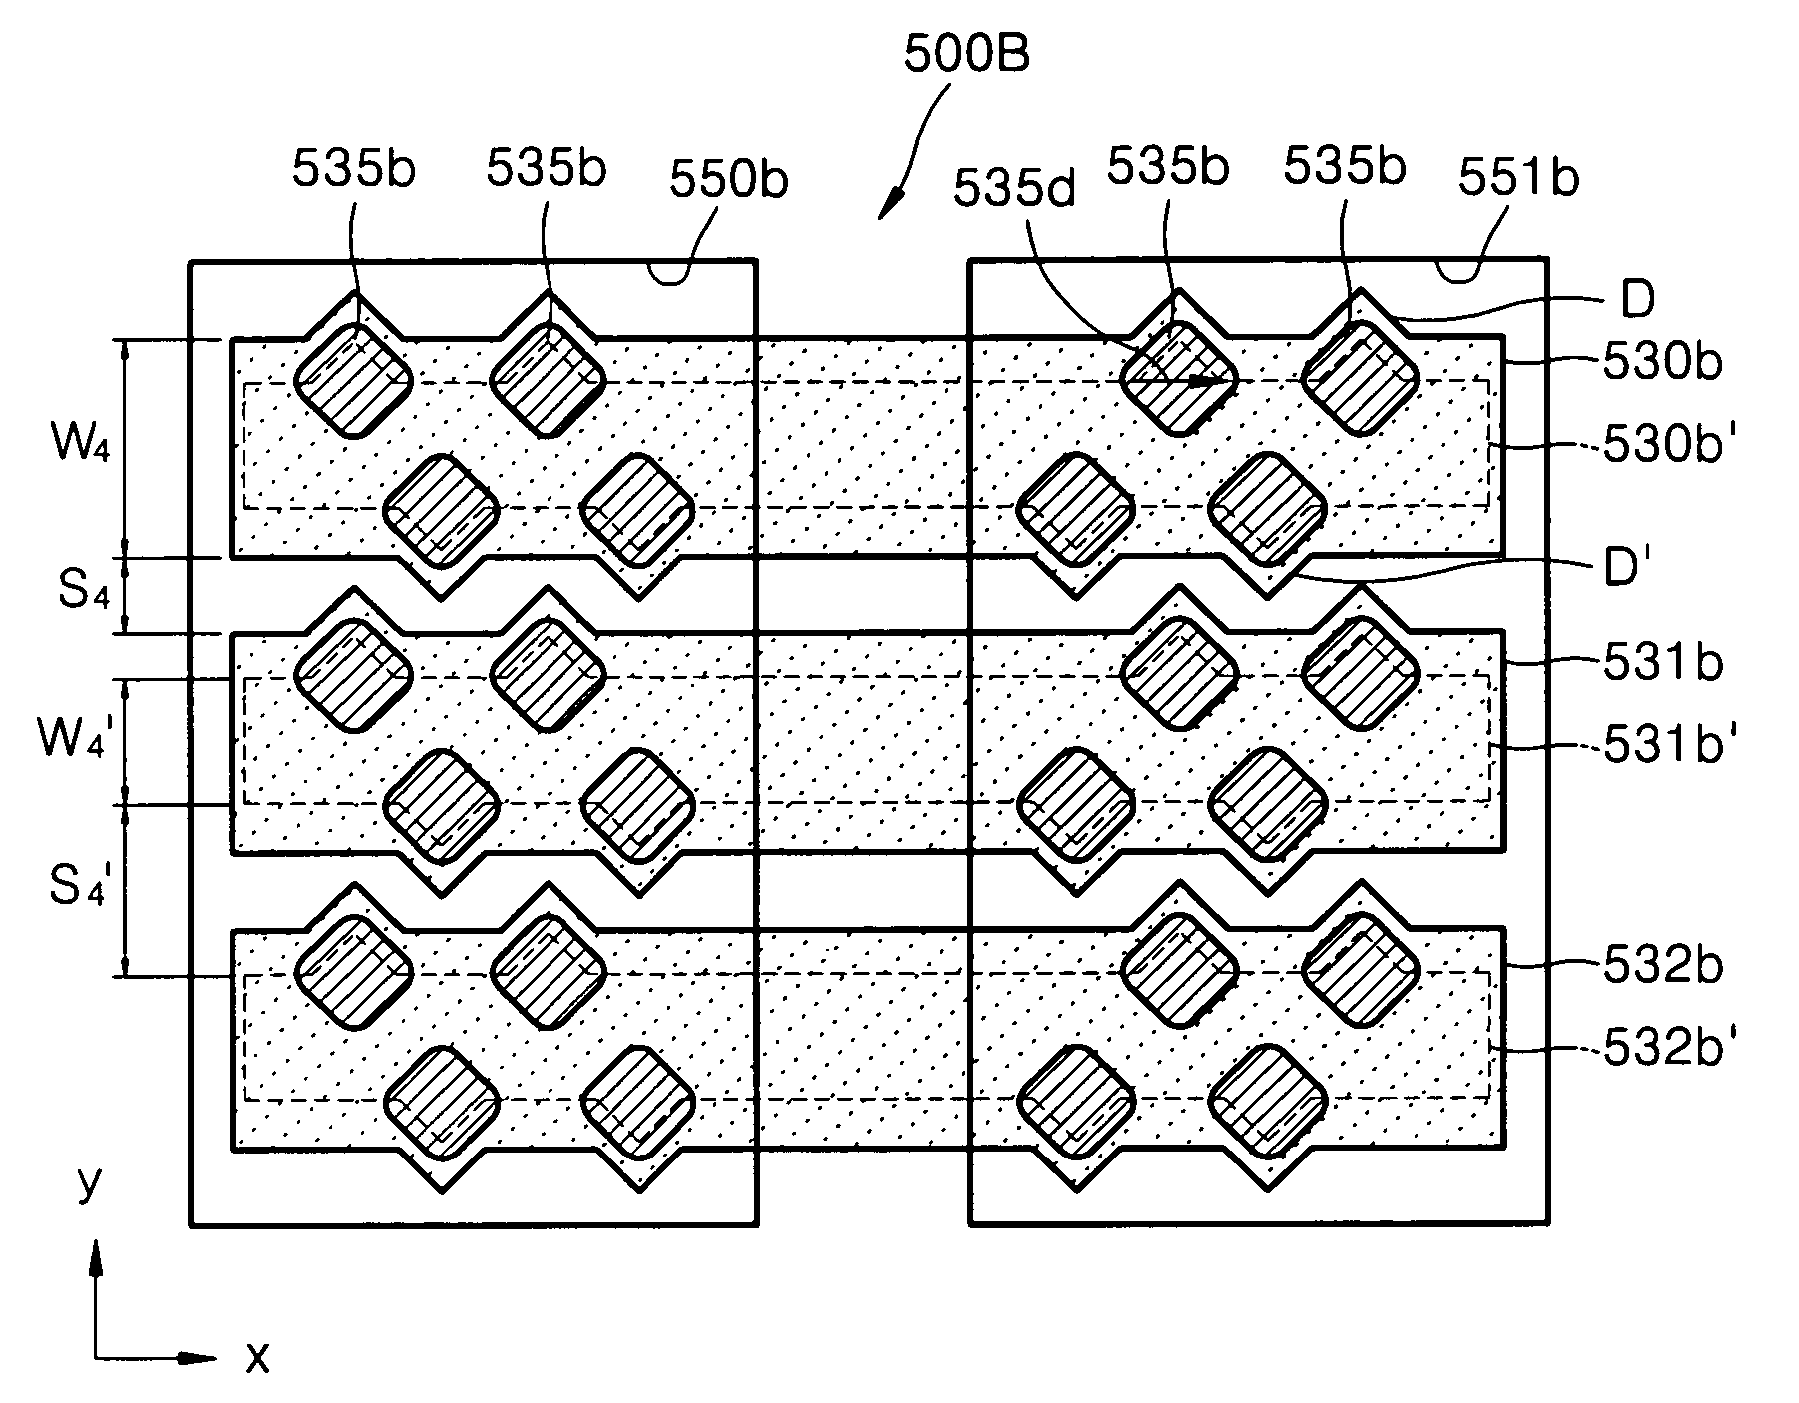 Semiconductor memory device having a decoupling capacitor